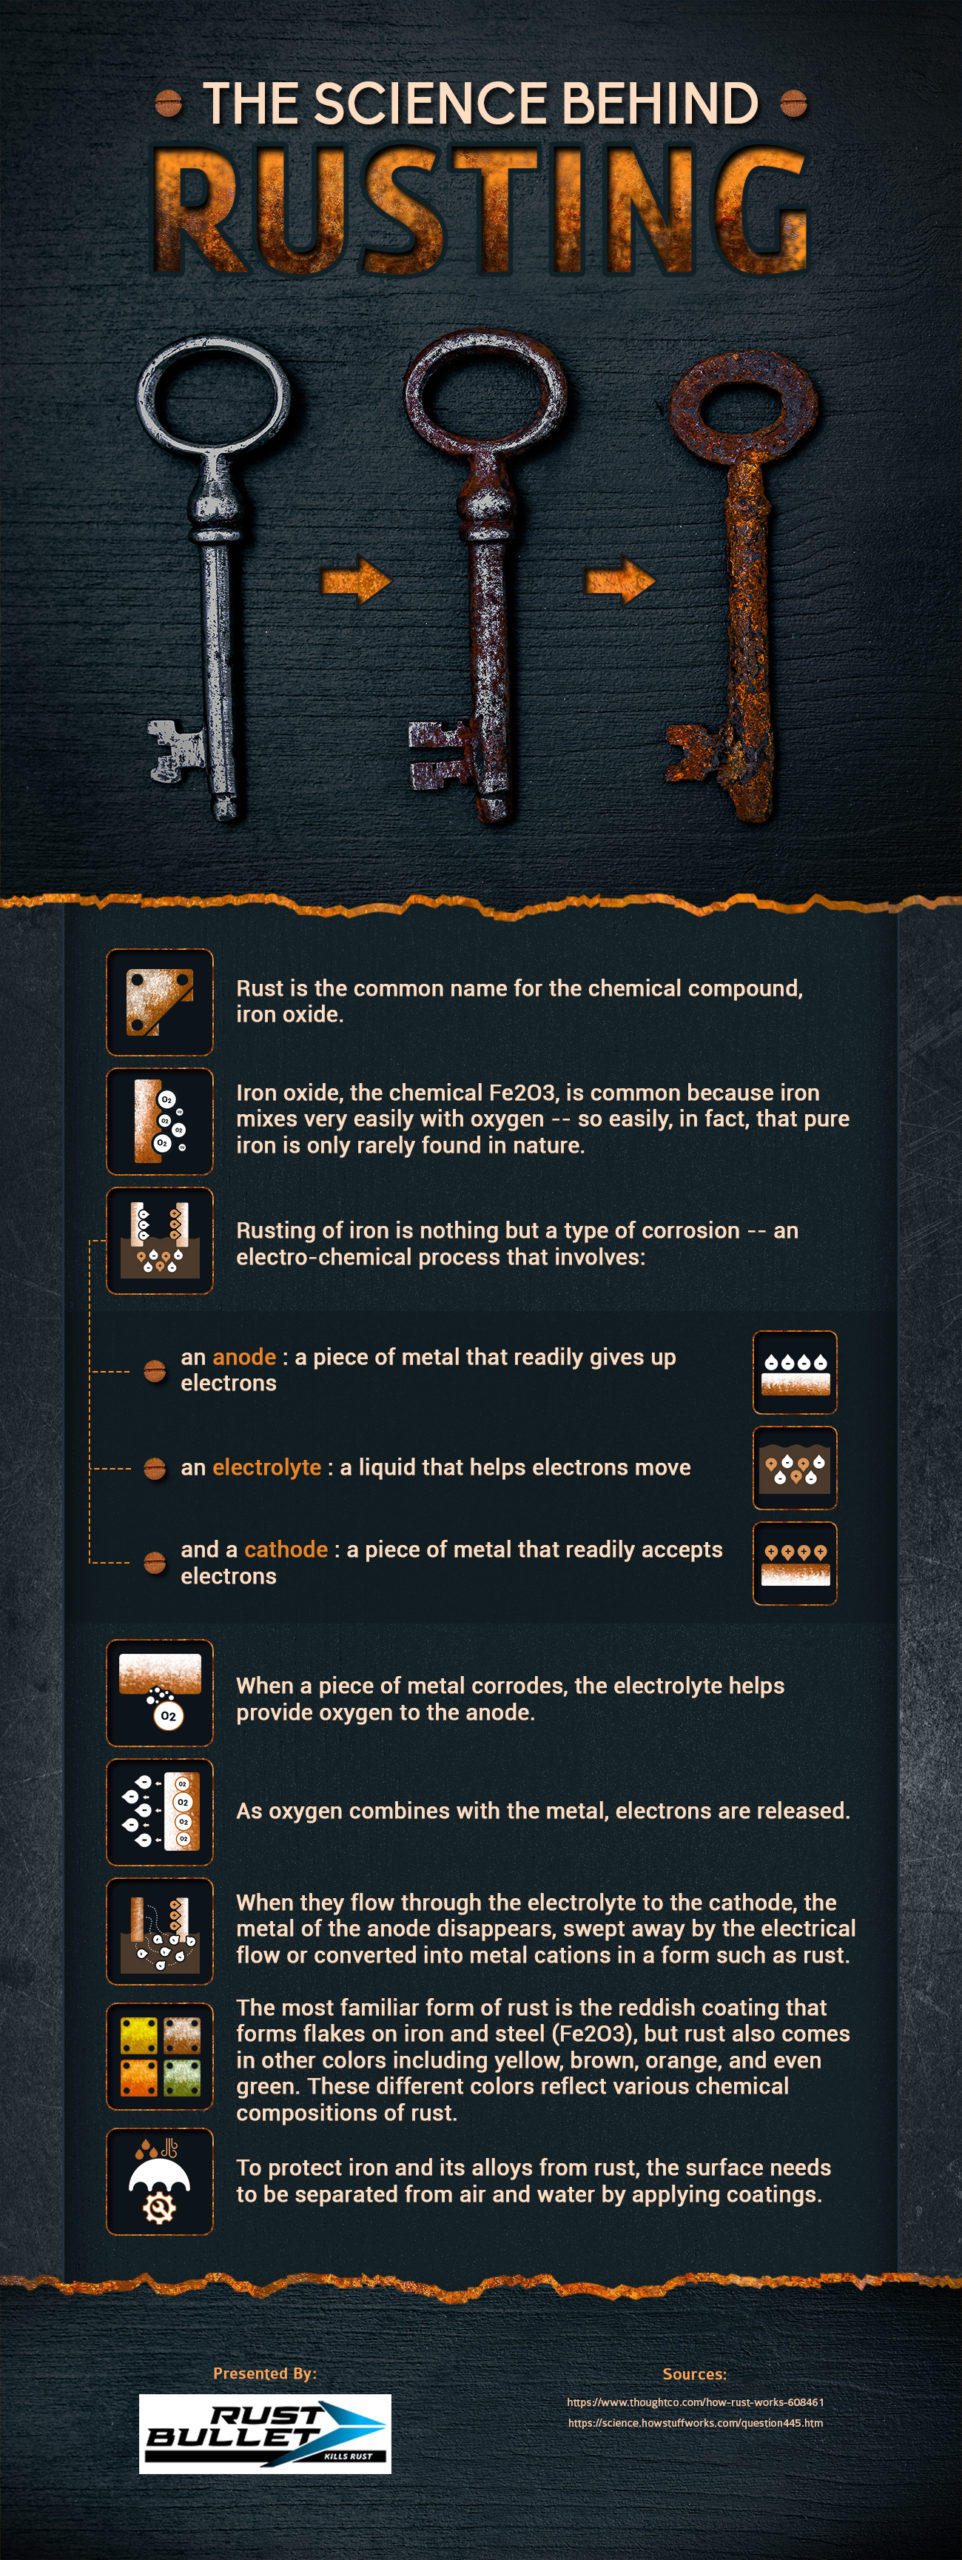  [Infographic] The Science Behind Rusting